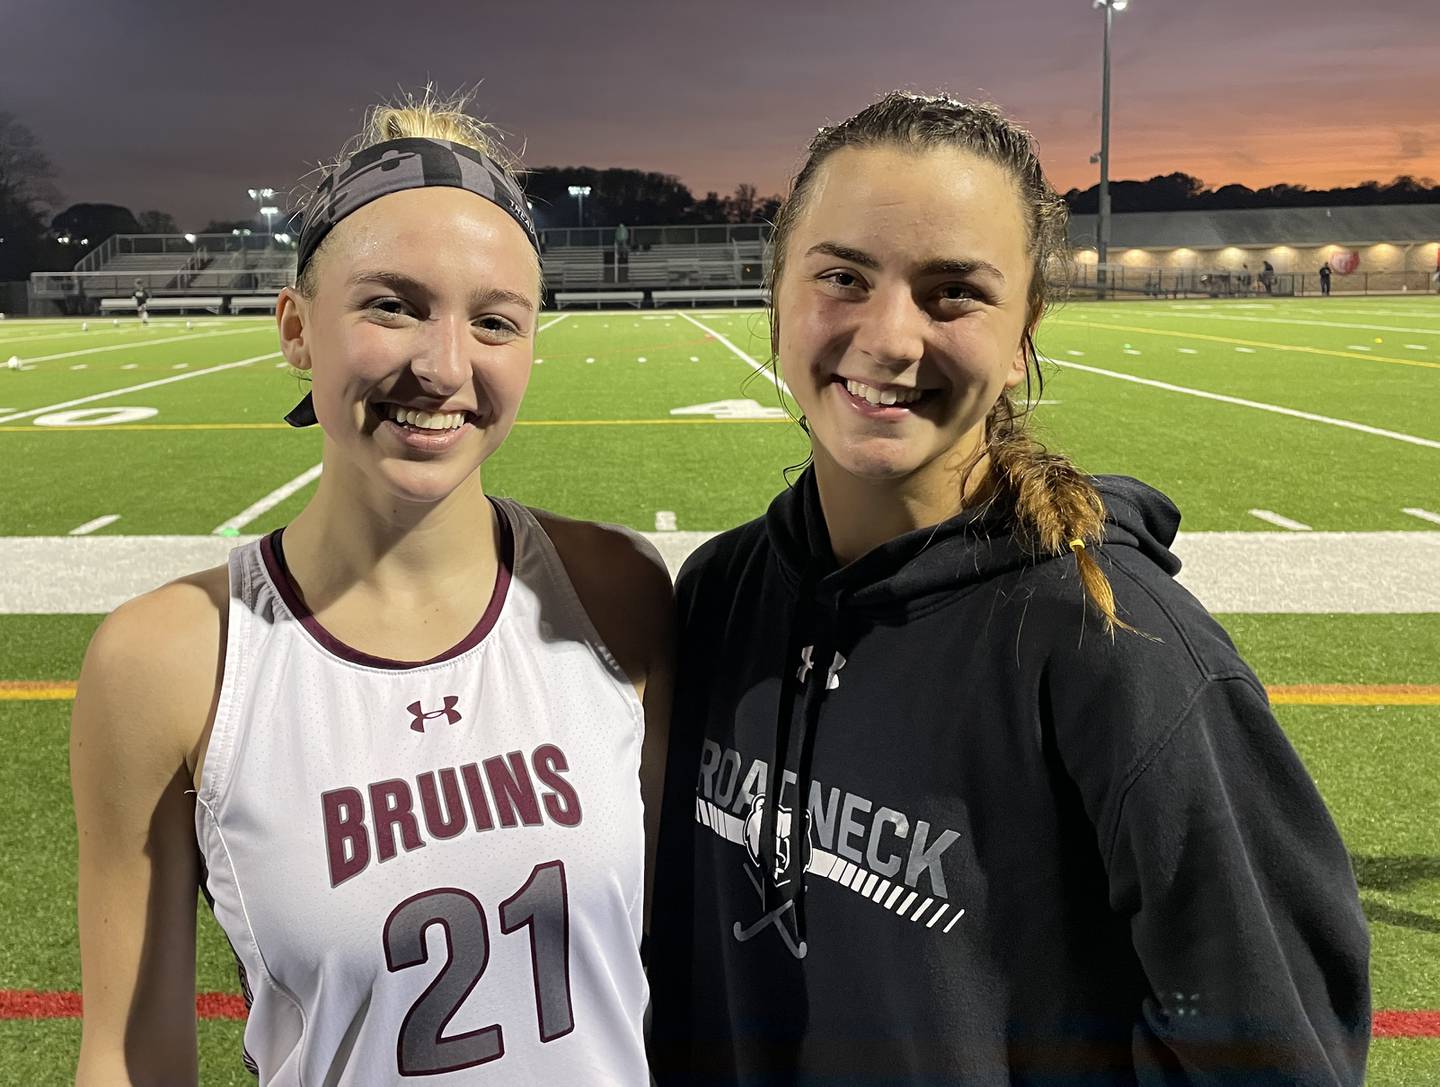 Seniors Maya Everett (left) and Arden Huntesman helped lead No. 1 Broadneck to a 3-1 victory over No. 6 Severna Park in the Class 4A state semifinals. Huntsman had a goal and an assist as the Bruins (18-0) continued their quest for a third state title and their first in 20 years.